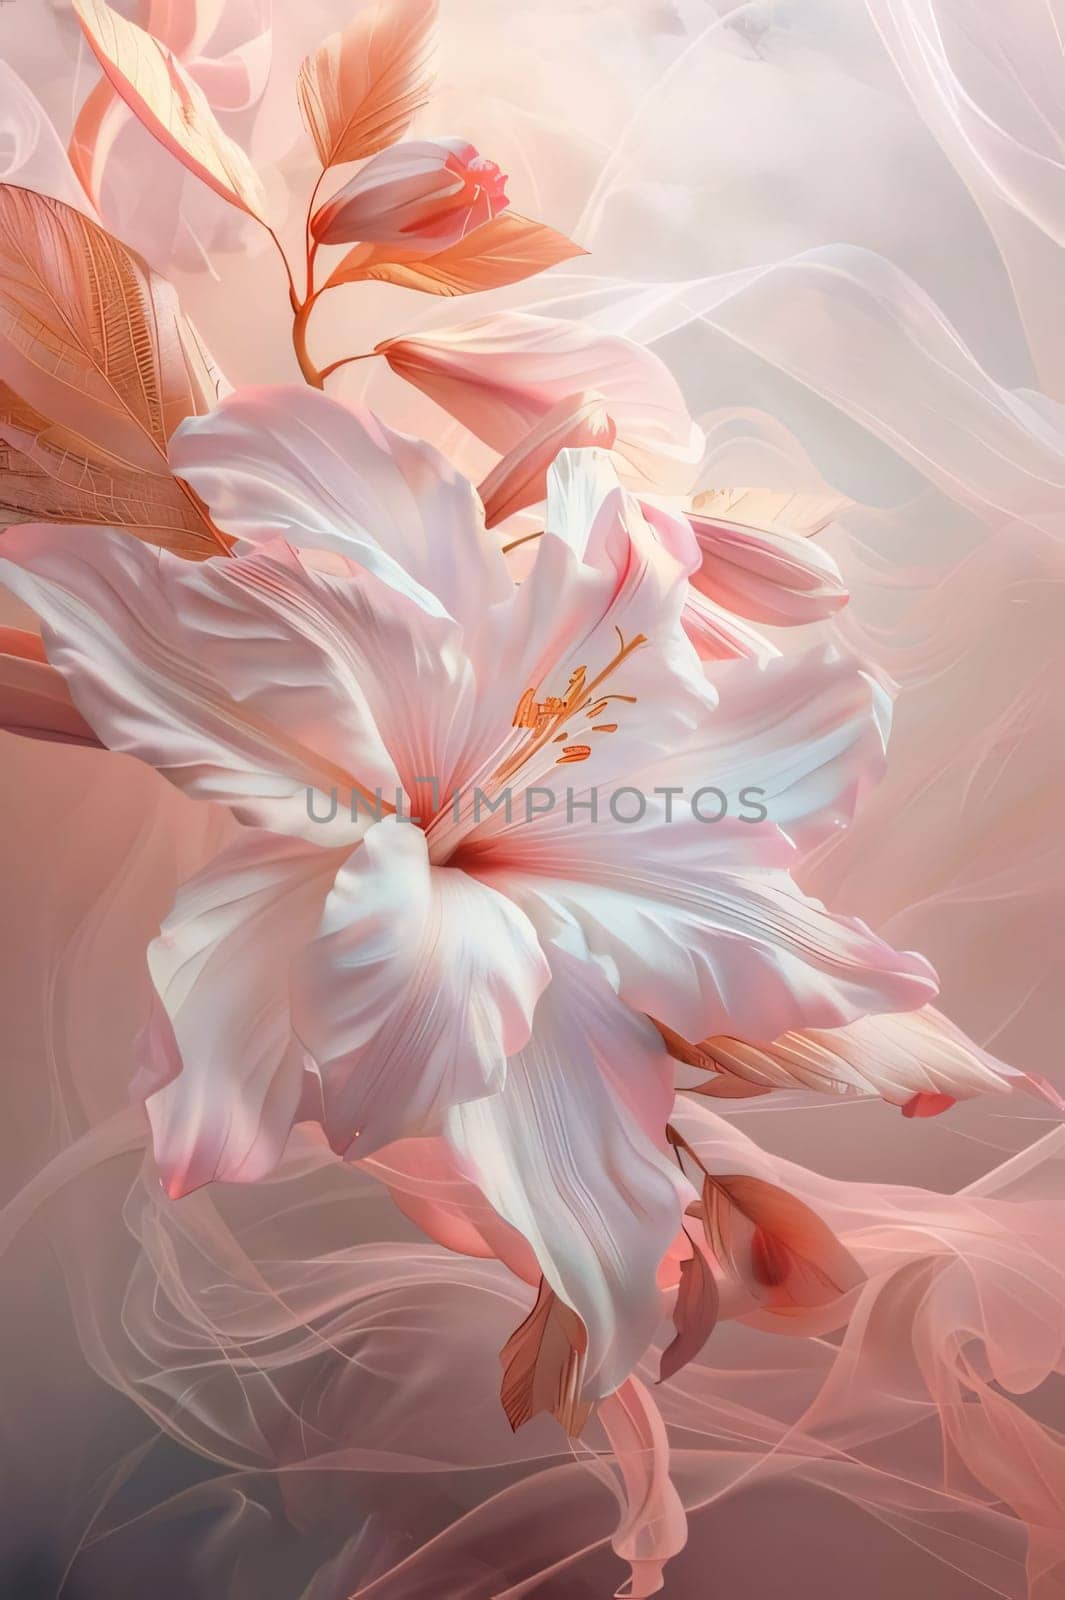 Pink and white lily flower around delicate decorations pink waves. Flowering flowers, a symbol of spring, new life. by ThemesS